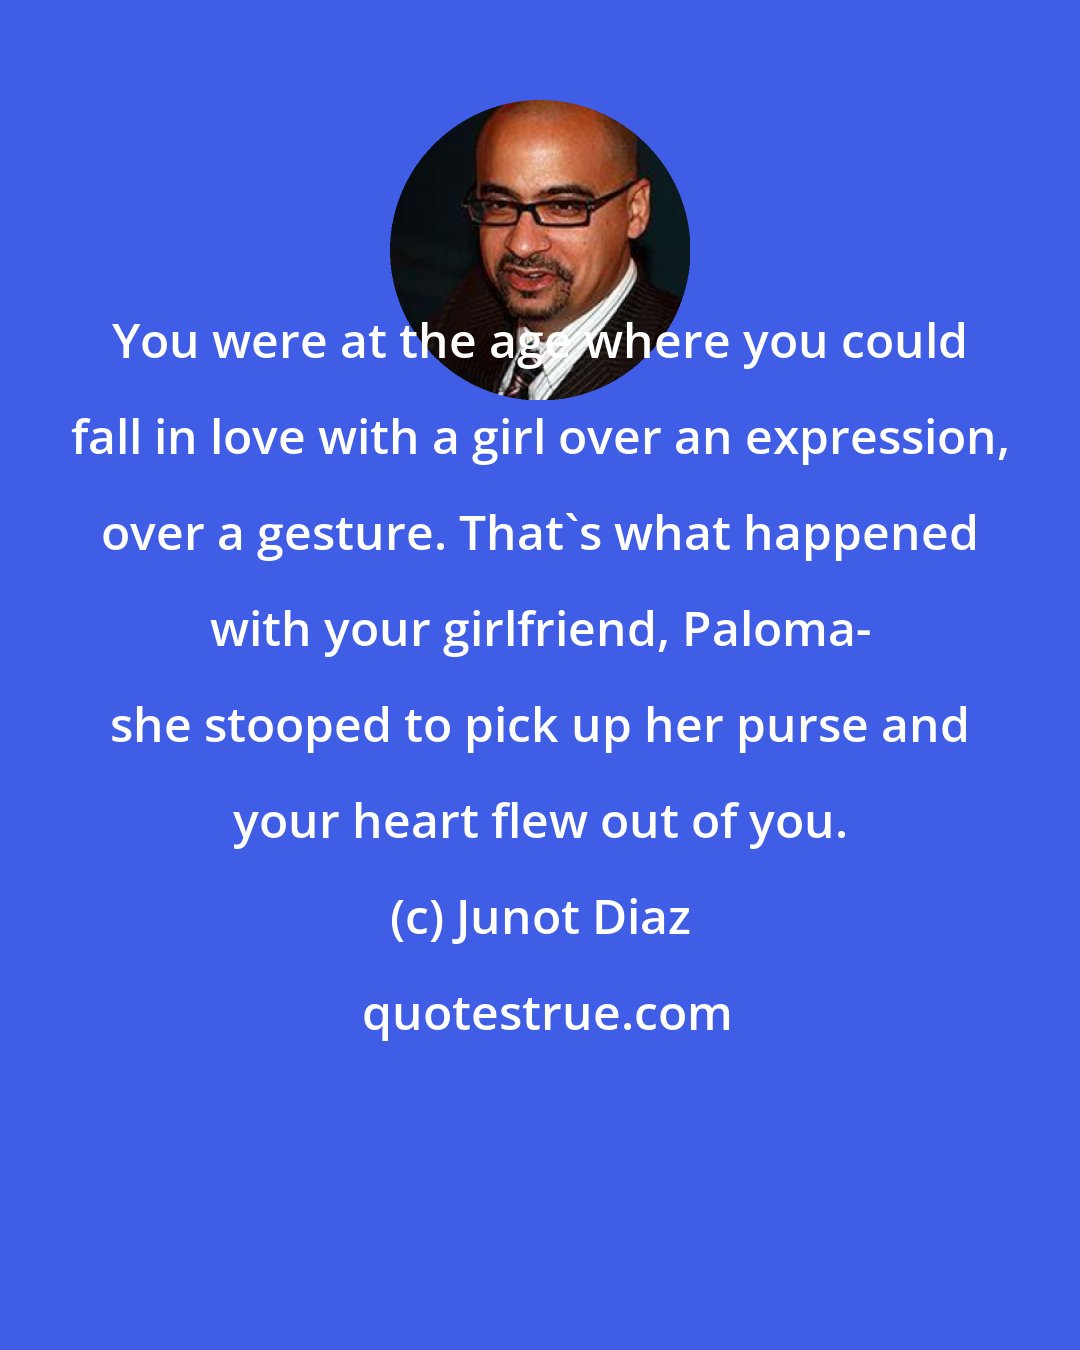 Junot Diaz: You were at the age where you could fall in love with a girl over an expression, over a gesture. That's what happened with your girlfriend, Paloma- she stooped to pick up her purse and your heart flew out of you.